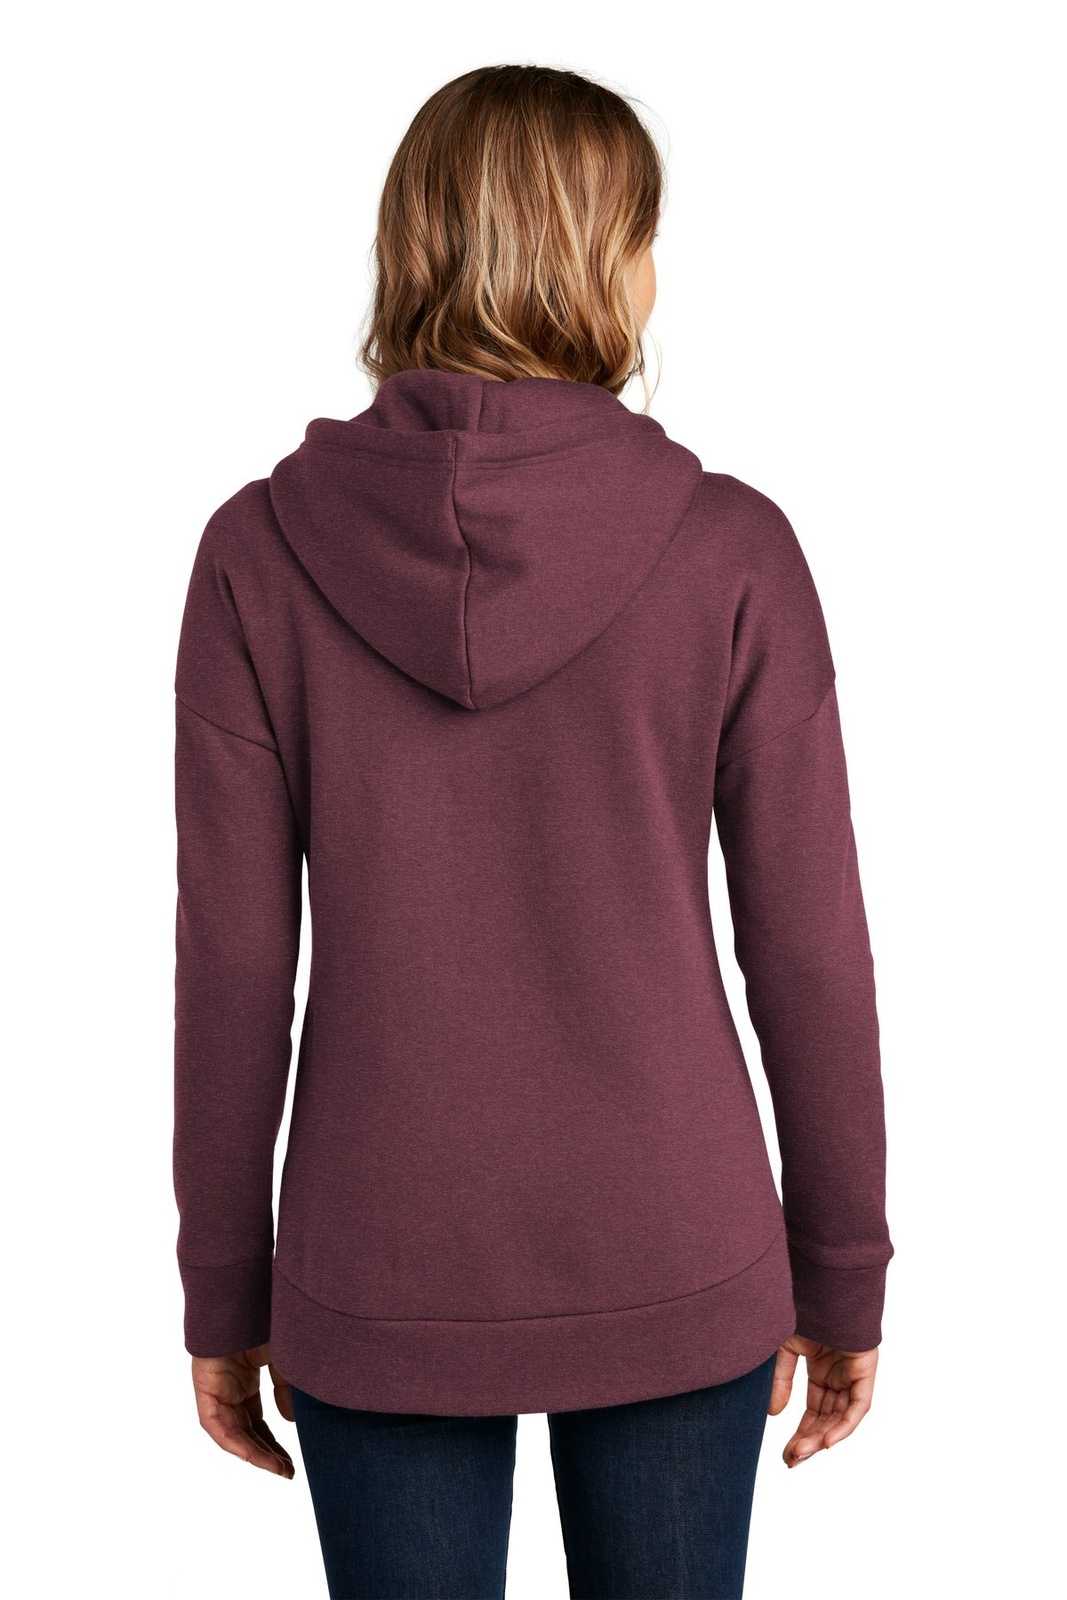 District DT1104 Womens Perfect Weight Fleece Drop Shoulder Full-Zip Hoodie - Heathered Loganberry - HIT a Double - 2